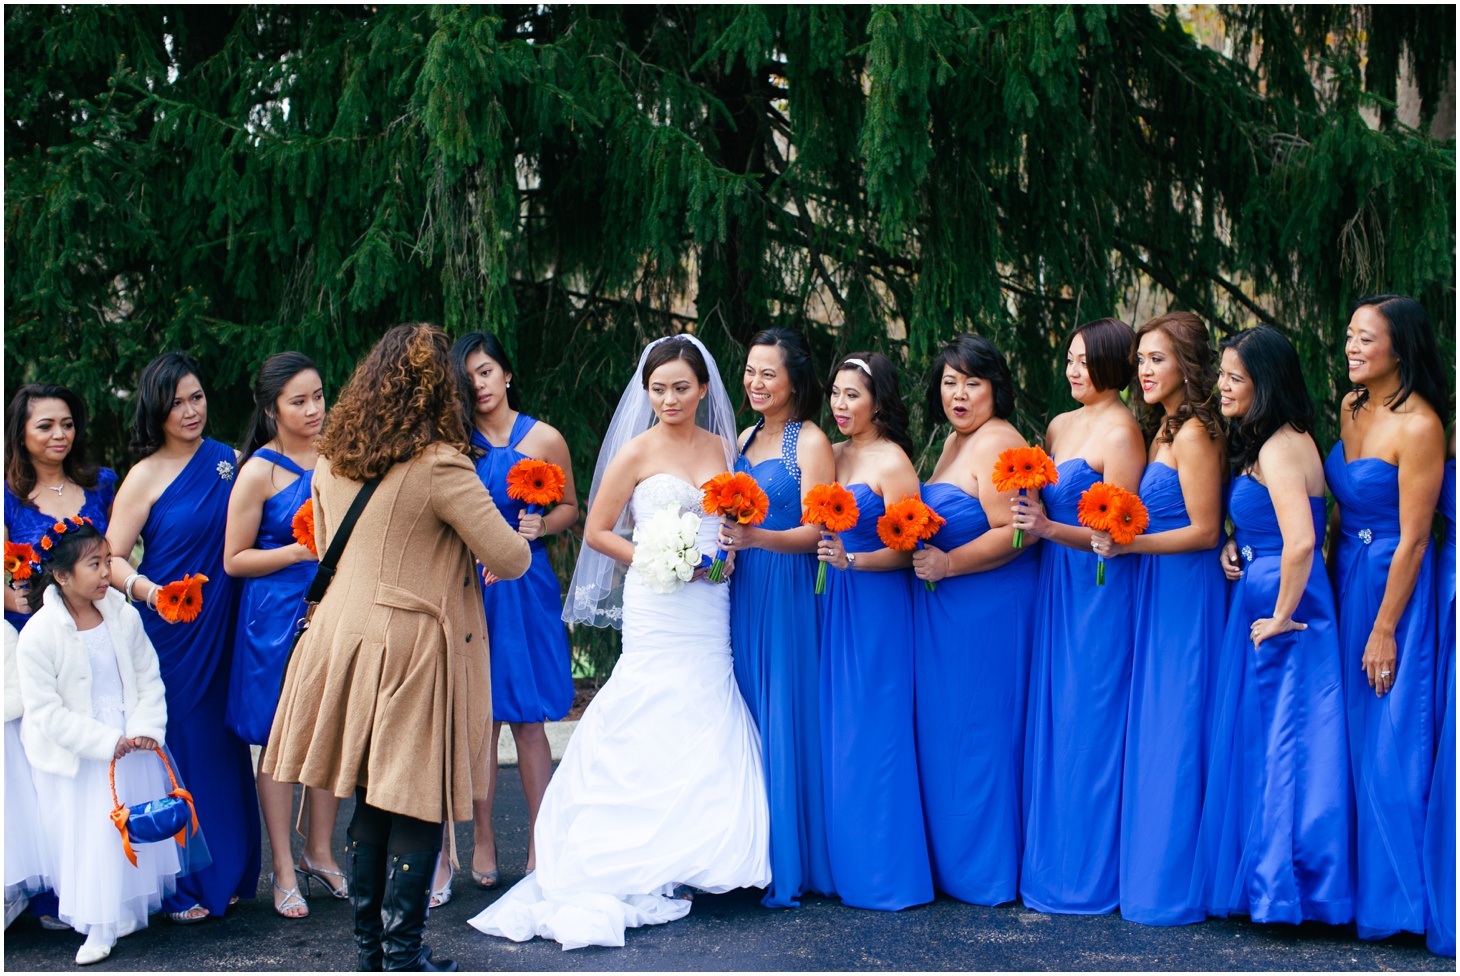 Behind the Scenes in 2014 - Weddings by Sarah Bradshaw Photography_0139